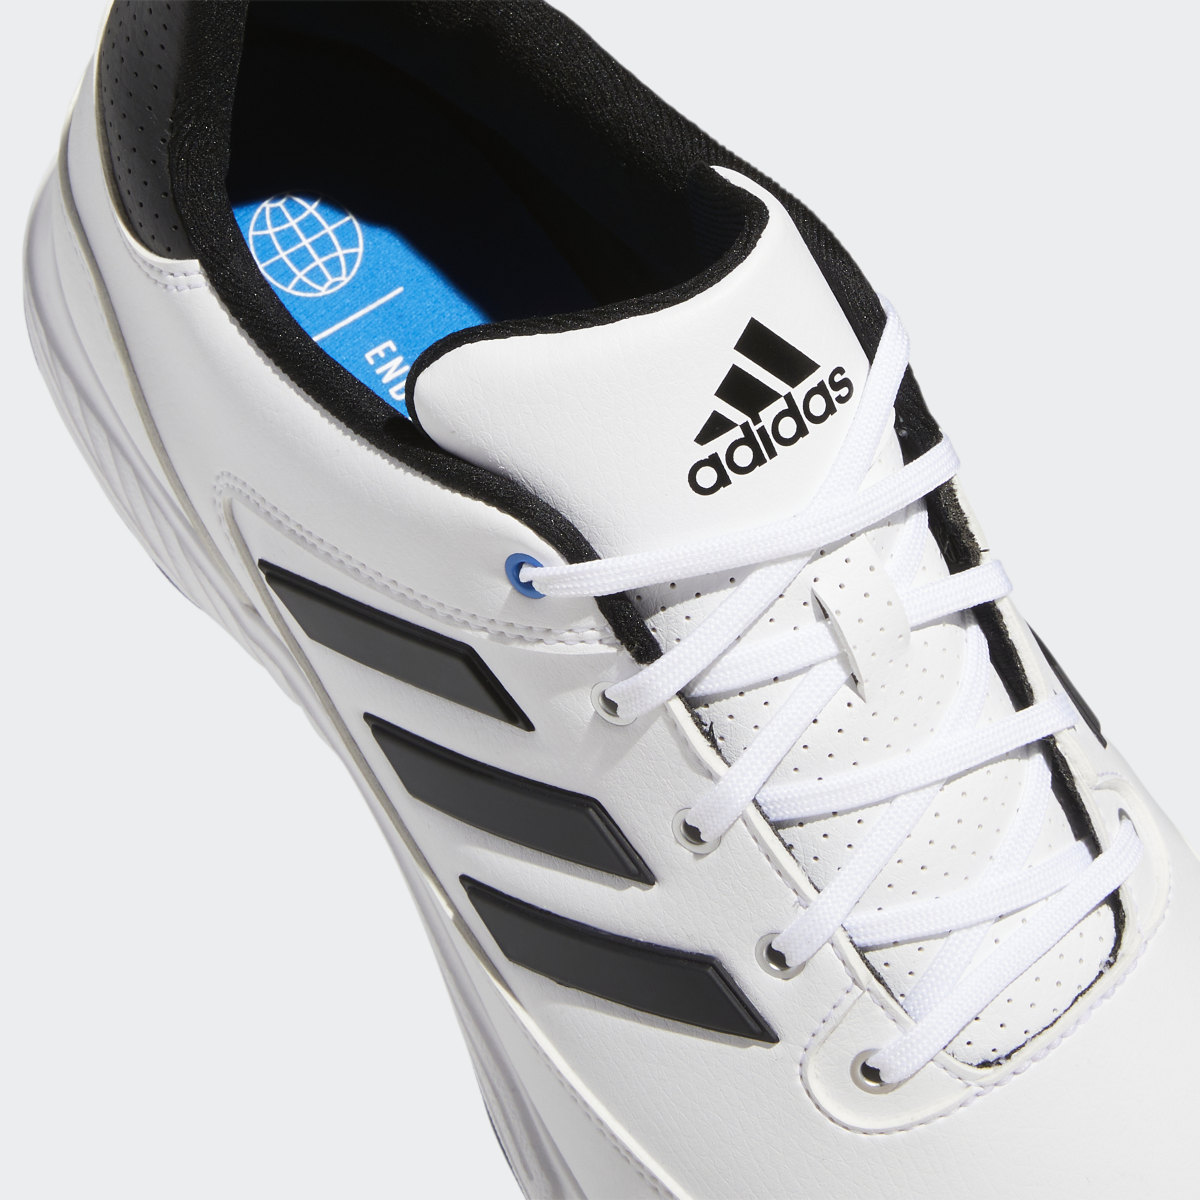 Adidas Golflite Max Wide Golf Shoes. 9